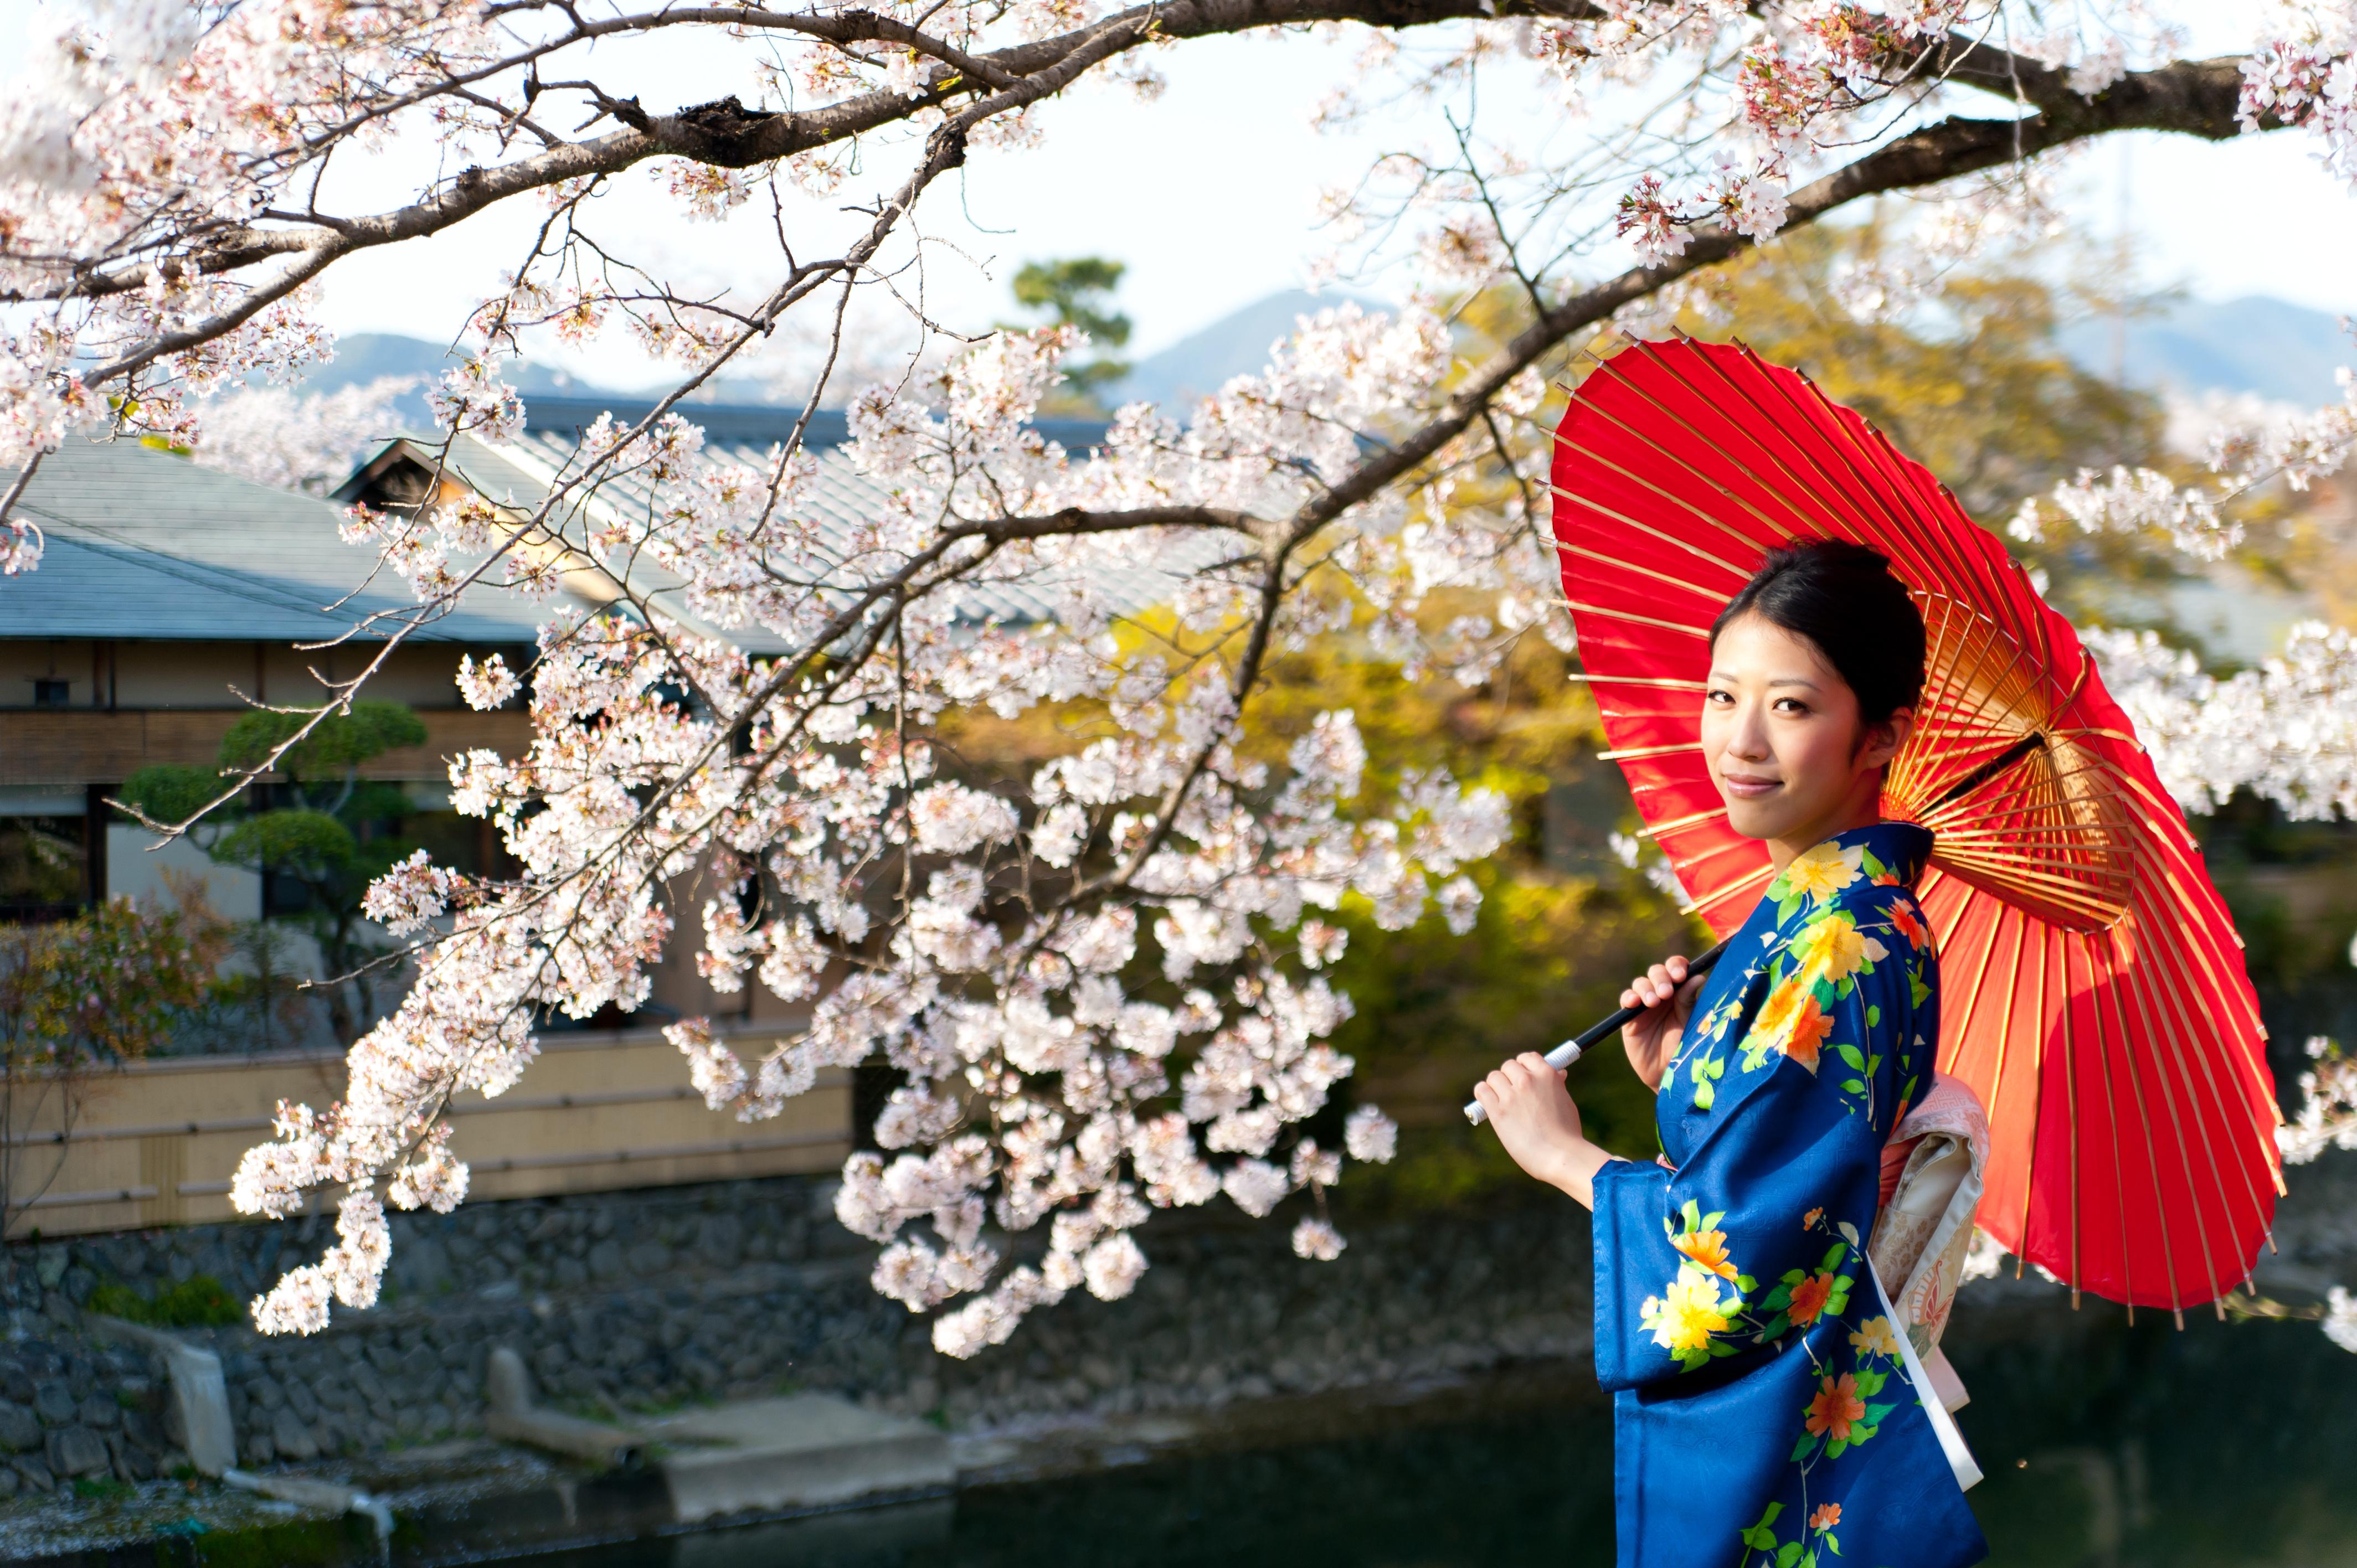 Japan - The home of world's most beautiful festivals including Cherry Blossom Lantern Festival